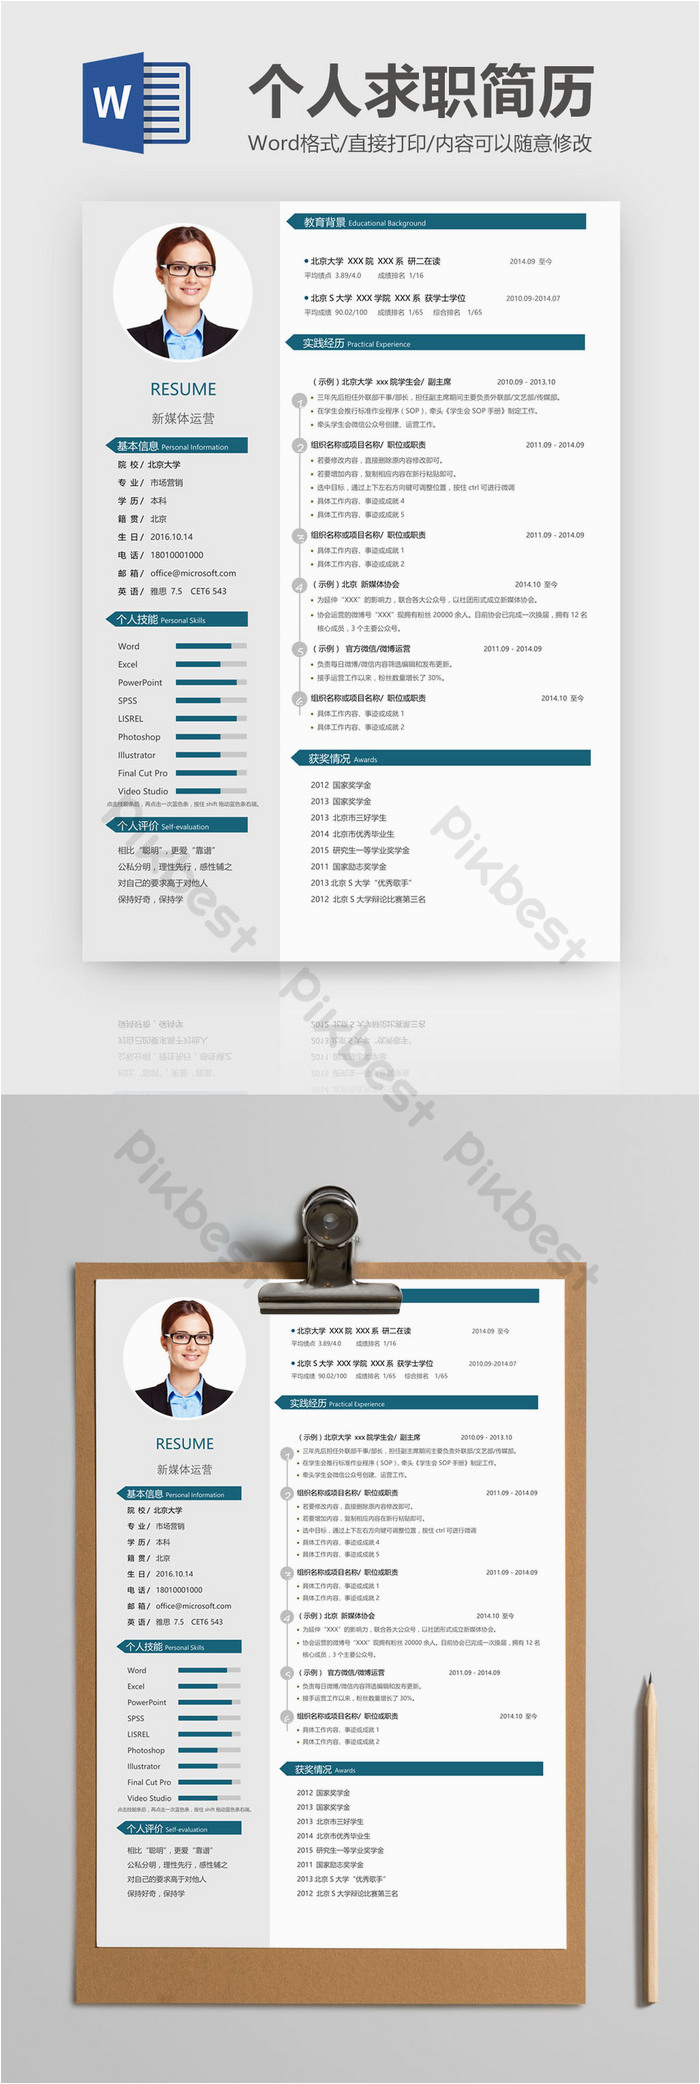 Blue Grey Resume Template Free Download Gray Blue Job Resume Word Template